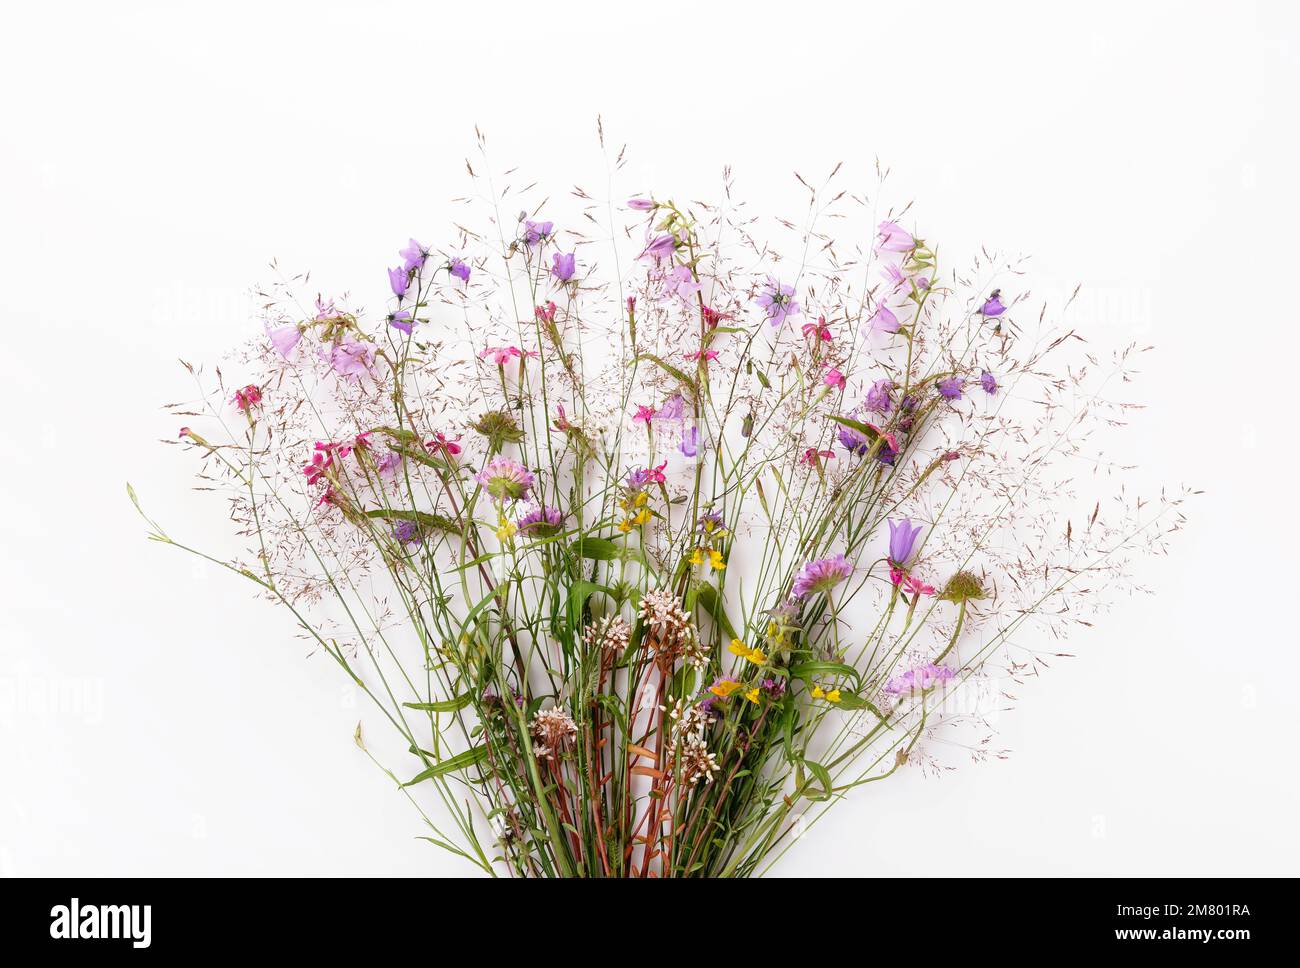 Festive bouquet of yellow and purple, blue wildflowers, herbs on white background. Stock Photo